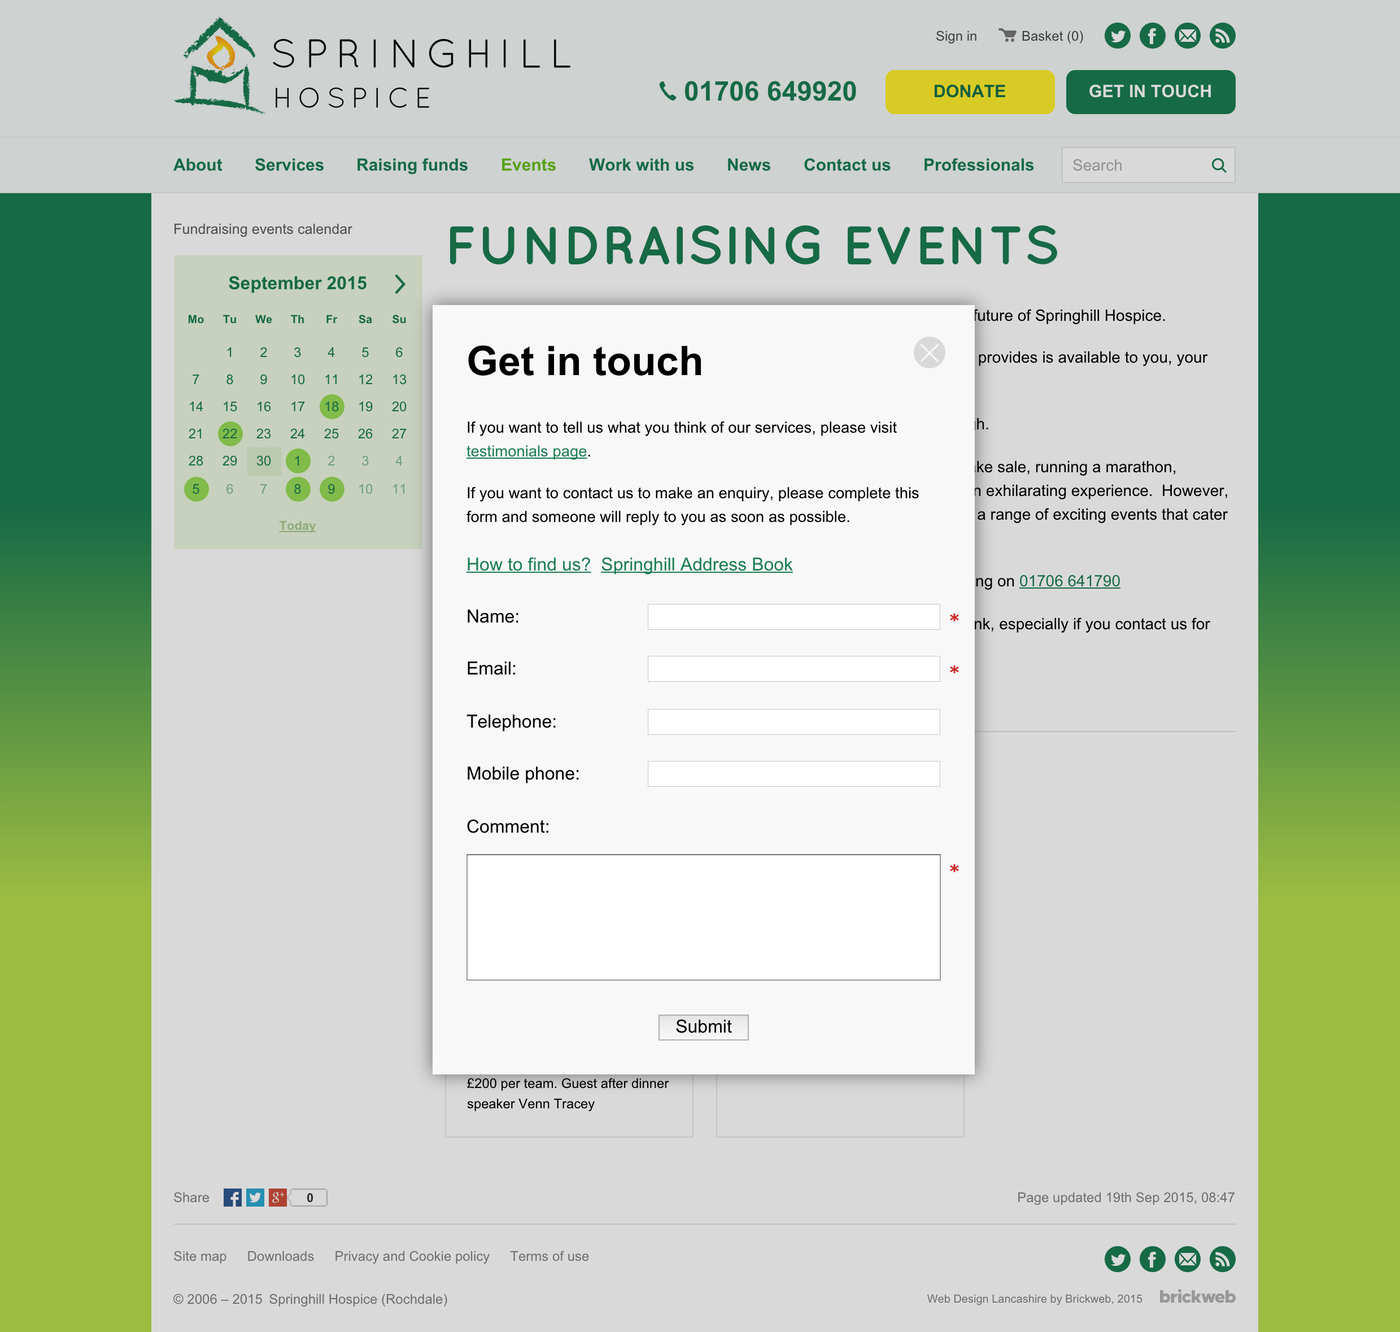 Springhill Hospice Get in touch